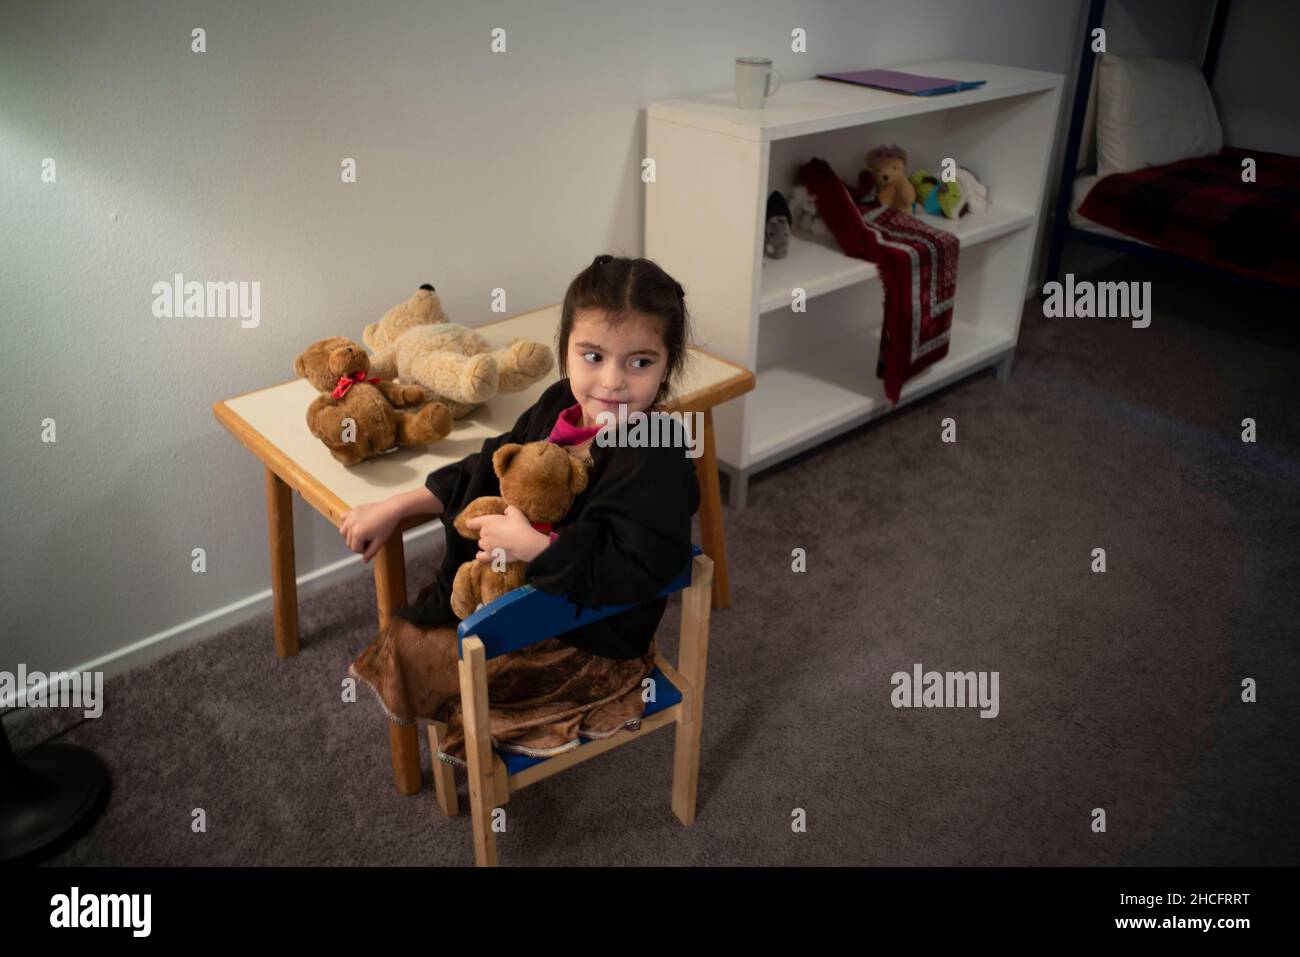 Austin Texas USA, December 2021: An Afghan child cuddles a stuffed bear and sits in a child-sized chair in the bedroom of her family's new apartment near downtown. Refugees fleeing turmoil in Afghanistan continue to be resettled in Texas with many single men and large families with children moving into apartments across Austin. Faith-based and other non-profit groups have stepped up to help coordinate efforts in furnishing homes for hundreds of refugees. ©Bob Daemmrich Stock Photo